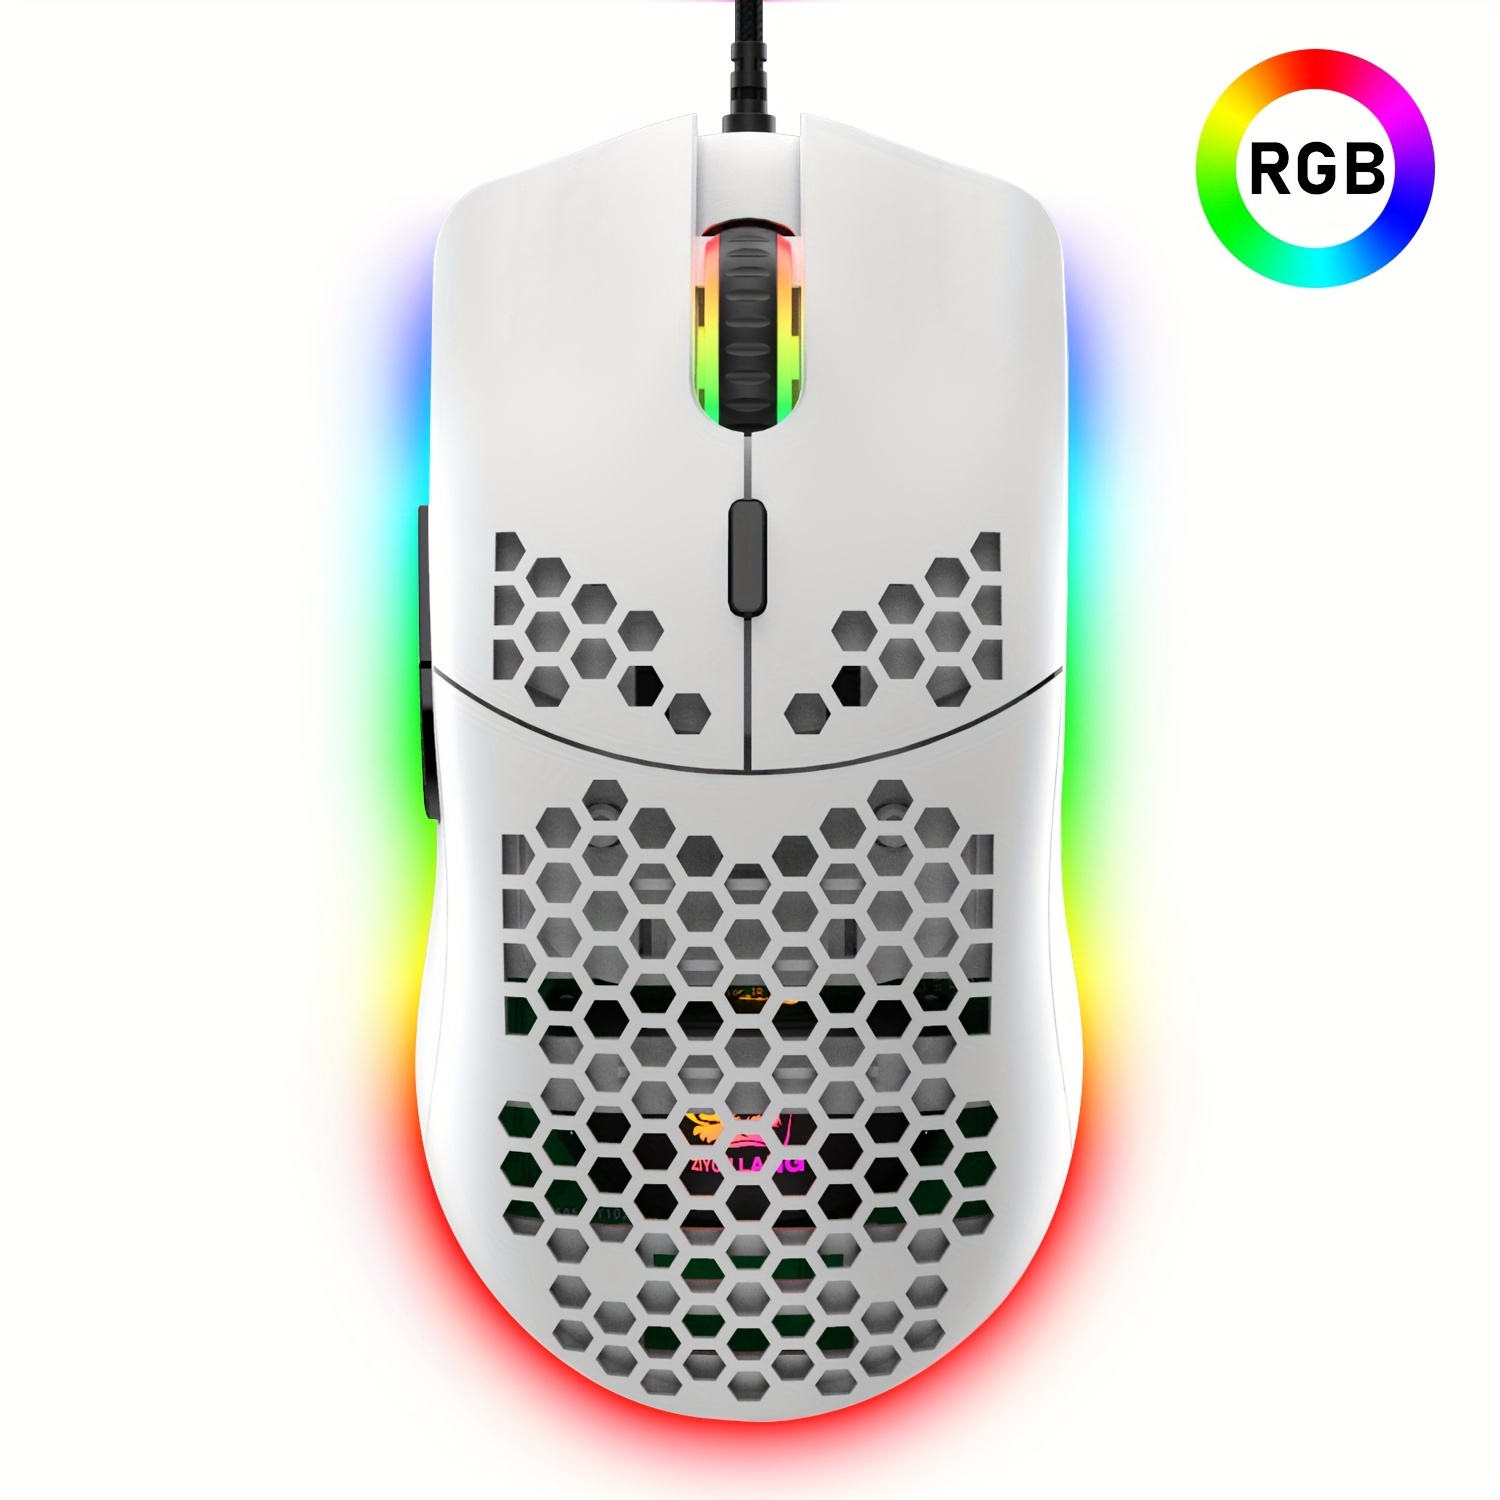 HP Wired RGB Gaming Mouse High Performance Mouse with Optical Sensor, 3  Buttons, 7 Color LED for Computer Notebook Laptop Office PC Home 